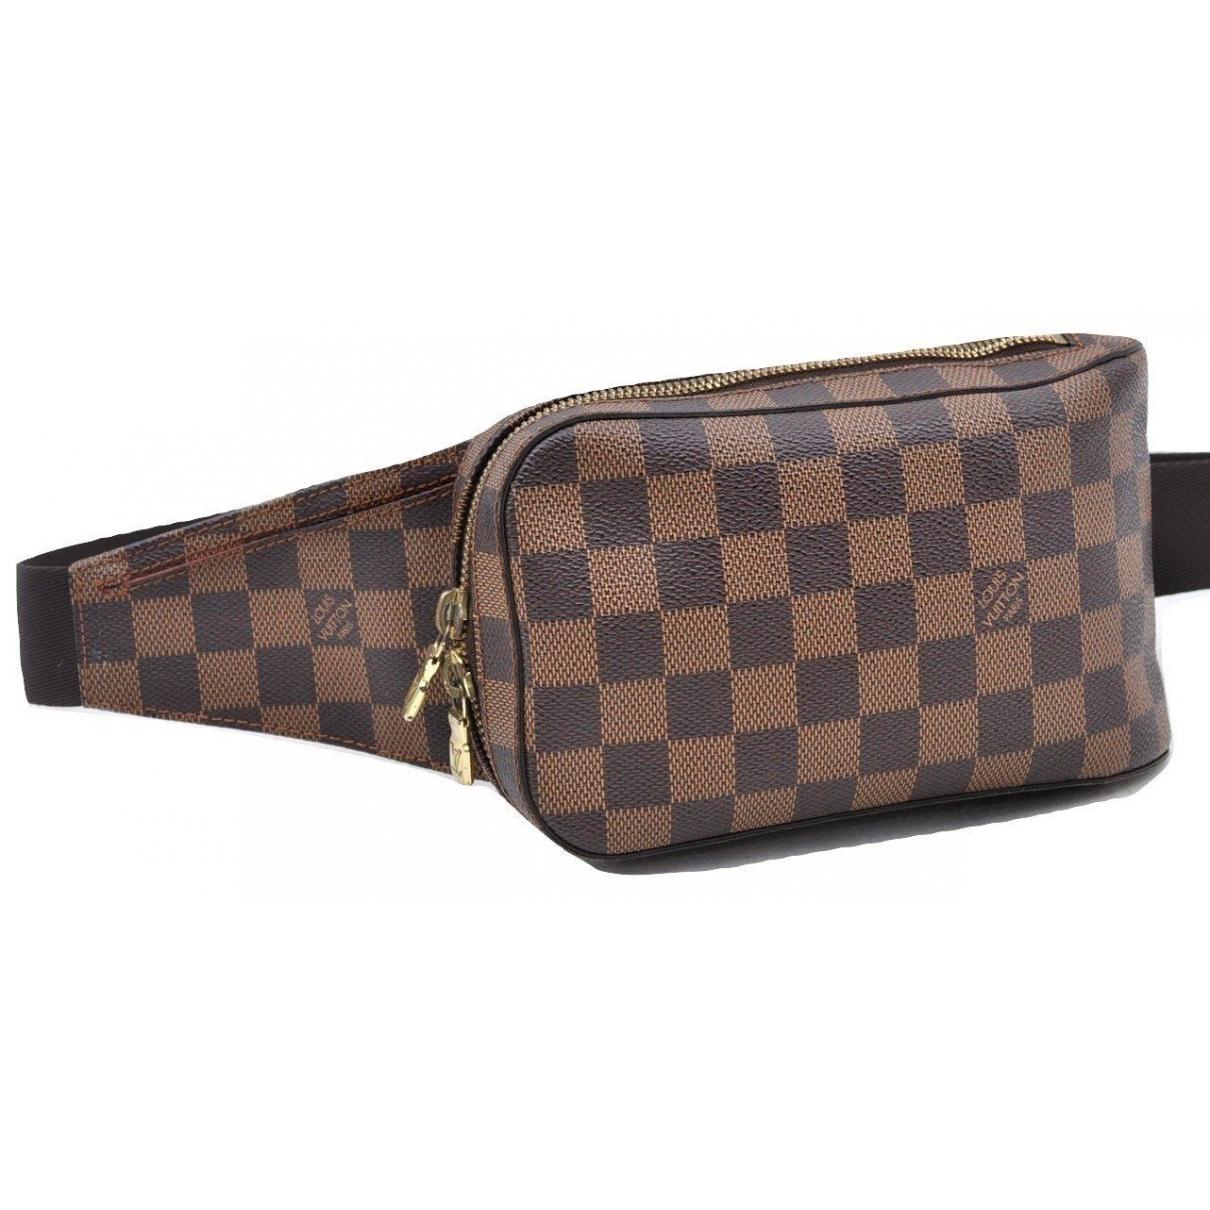 Louis Vuitton Geronimo Cloth Bag in Brown for Men - Lyst